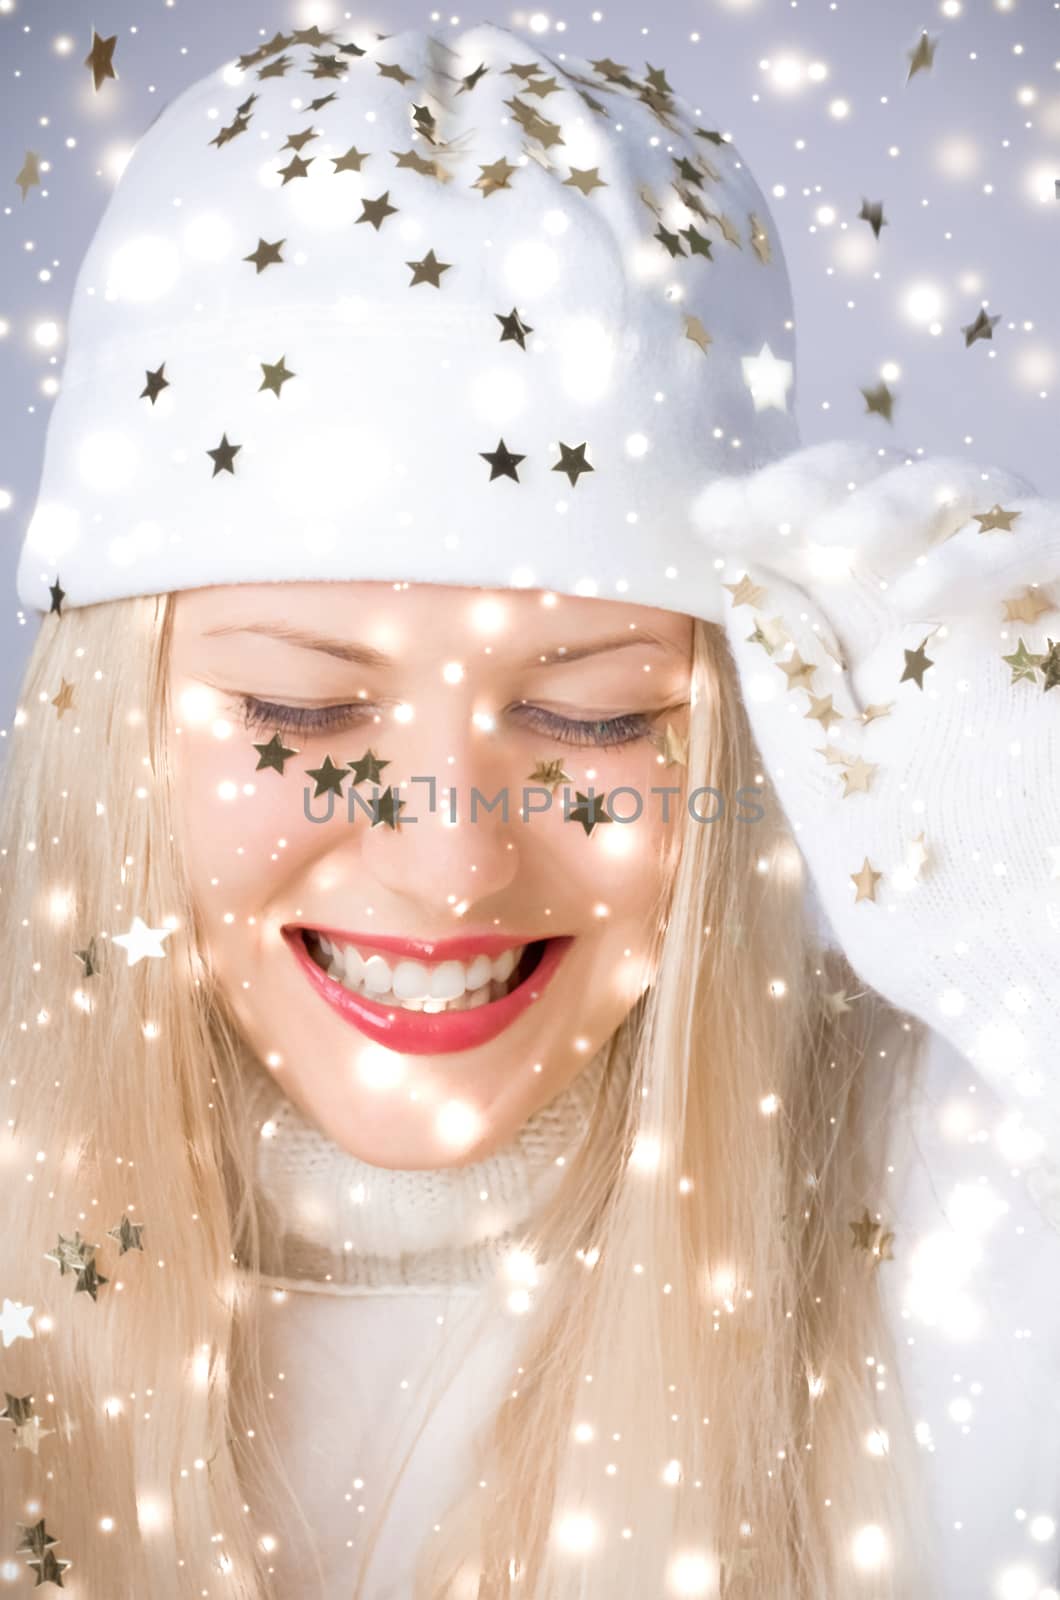 Happy Christmas and glitter snow background, blonde woman with p by Anneleven